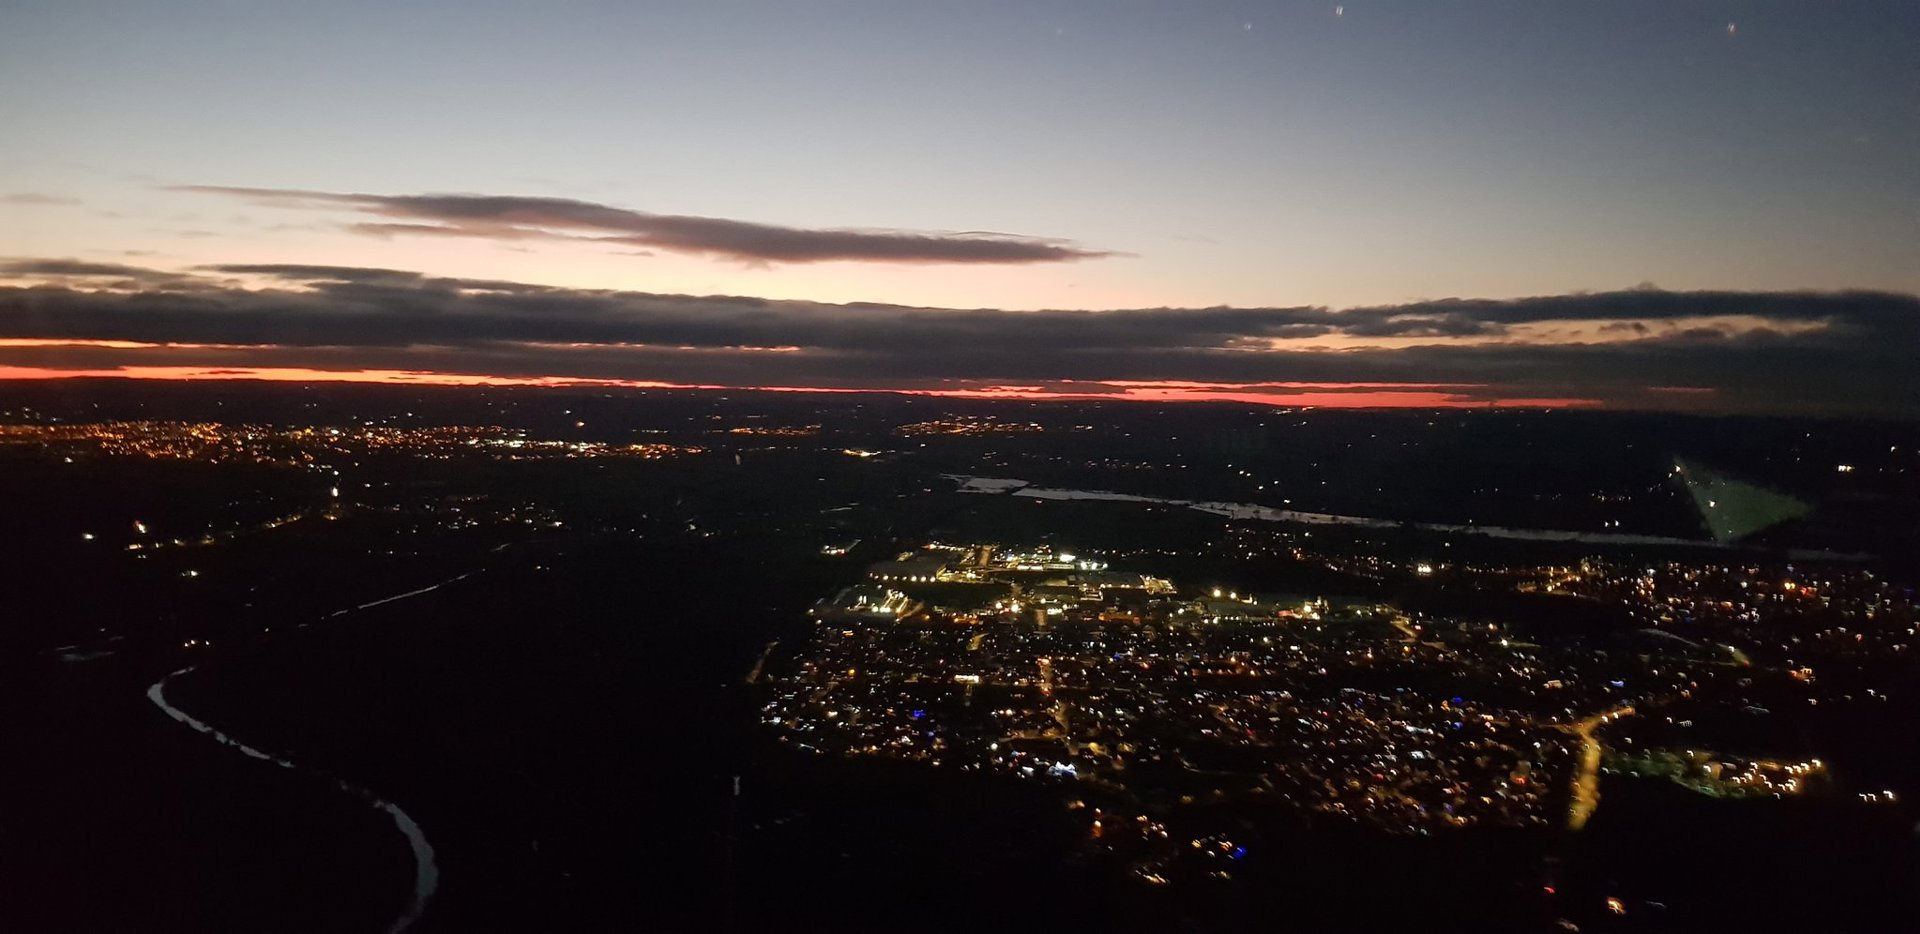 A photo of a town from above with a sunset